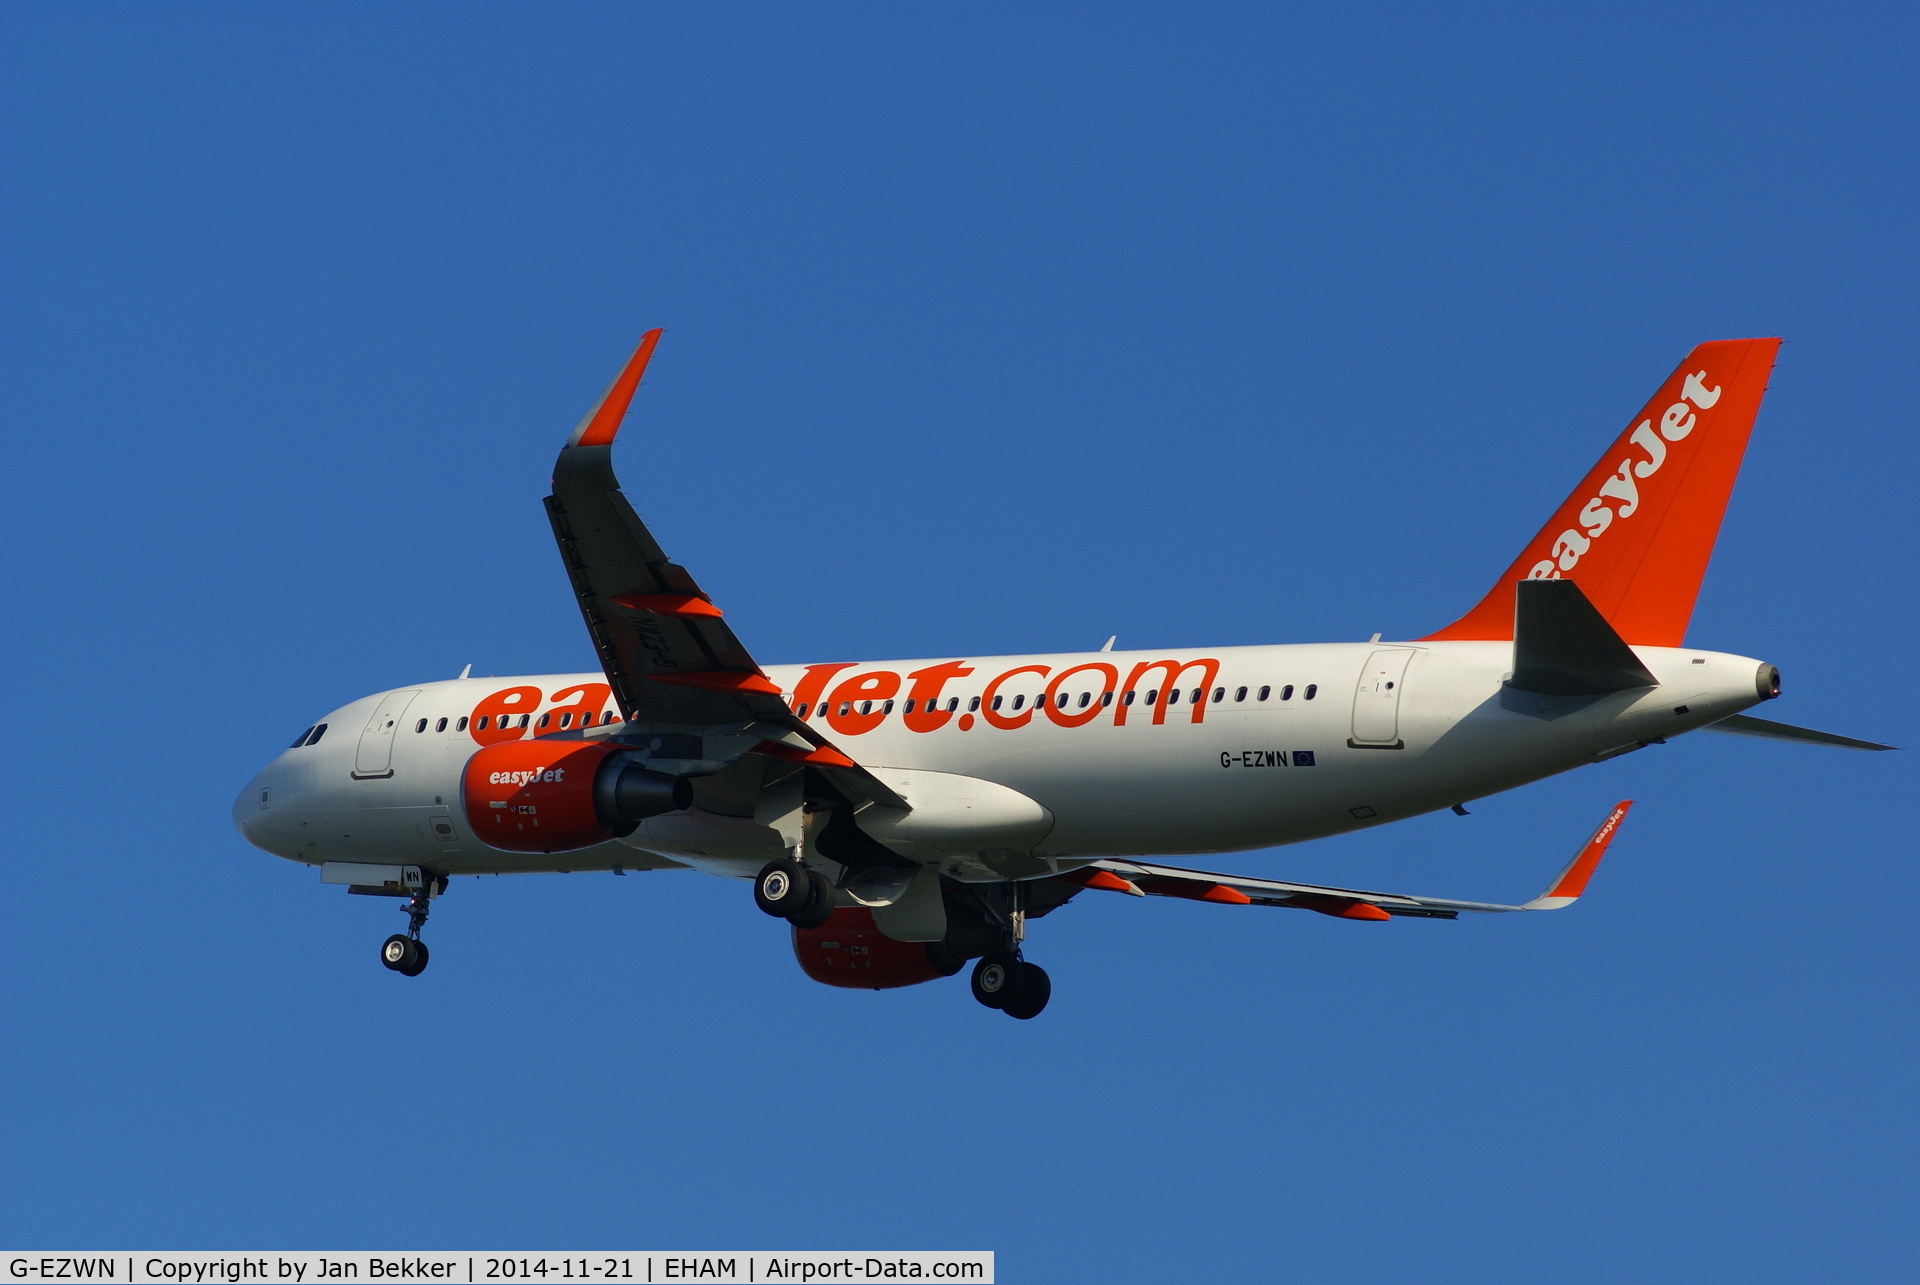 G-EZWN, 2013 Airbus A320-214 C/N 5757, Just after take off from the Polderbaan at Schiphol